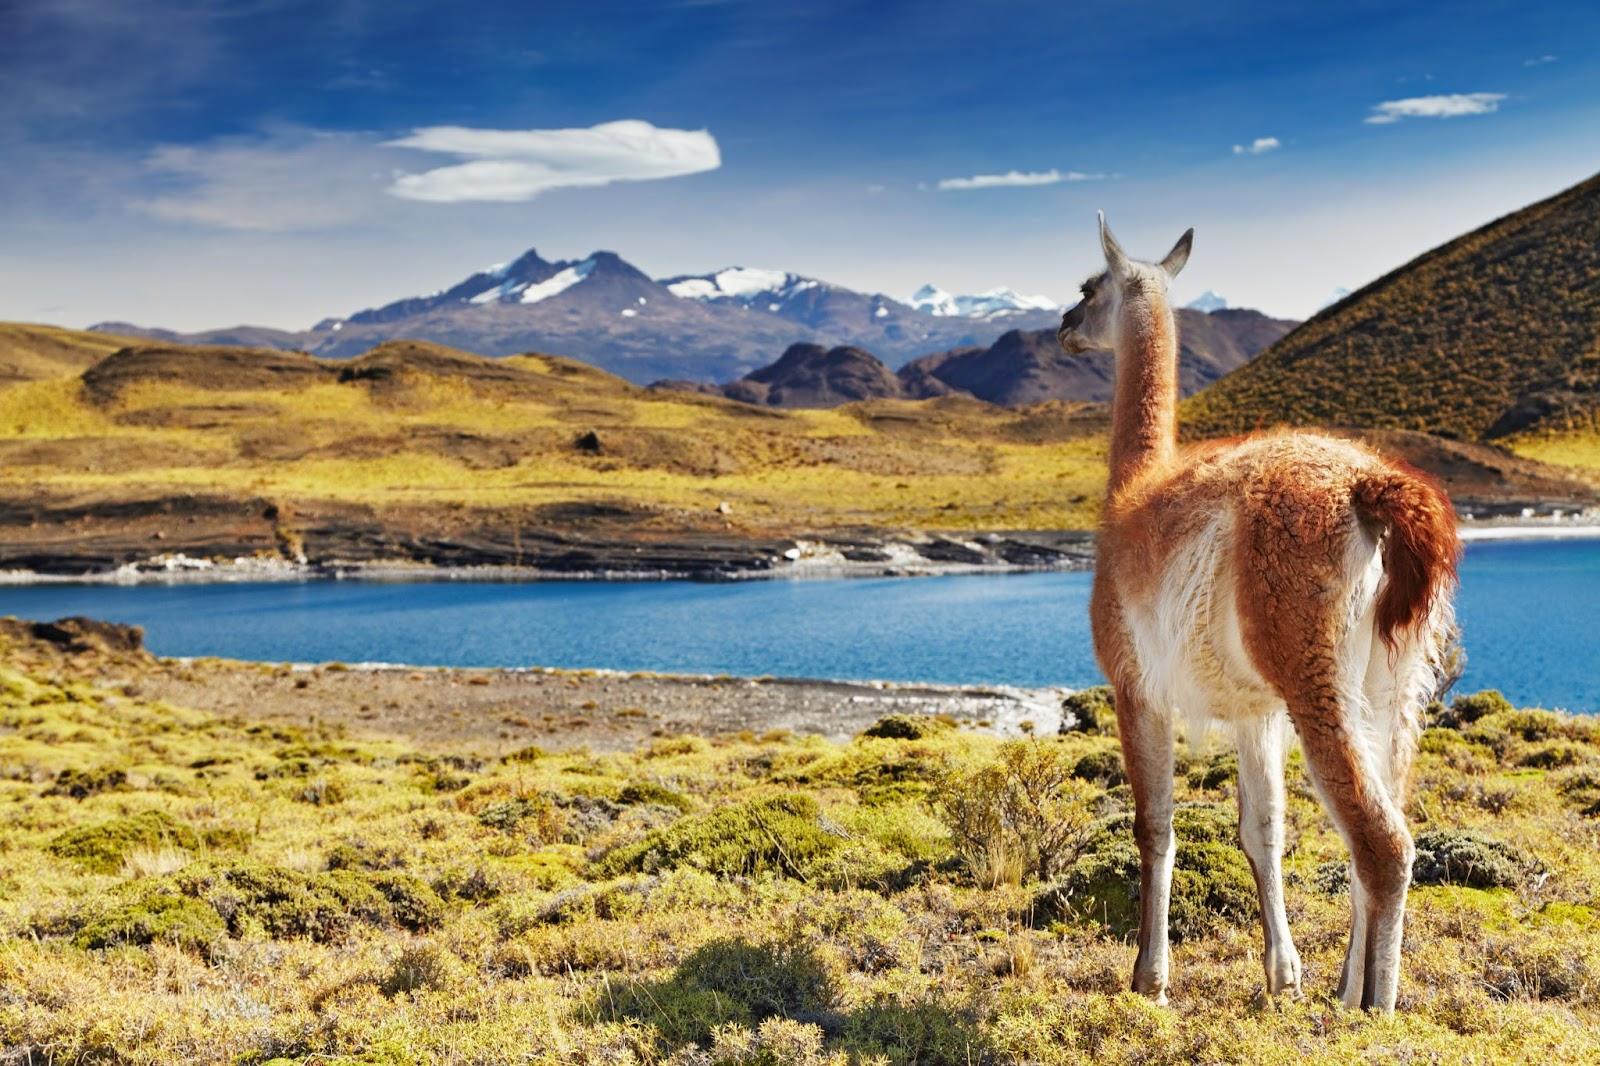 Guanaco in Torres del Paine National Park, Patagonia, Chile